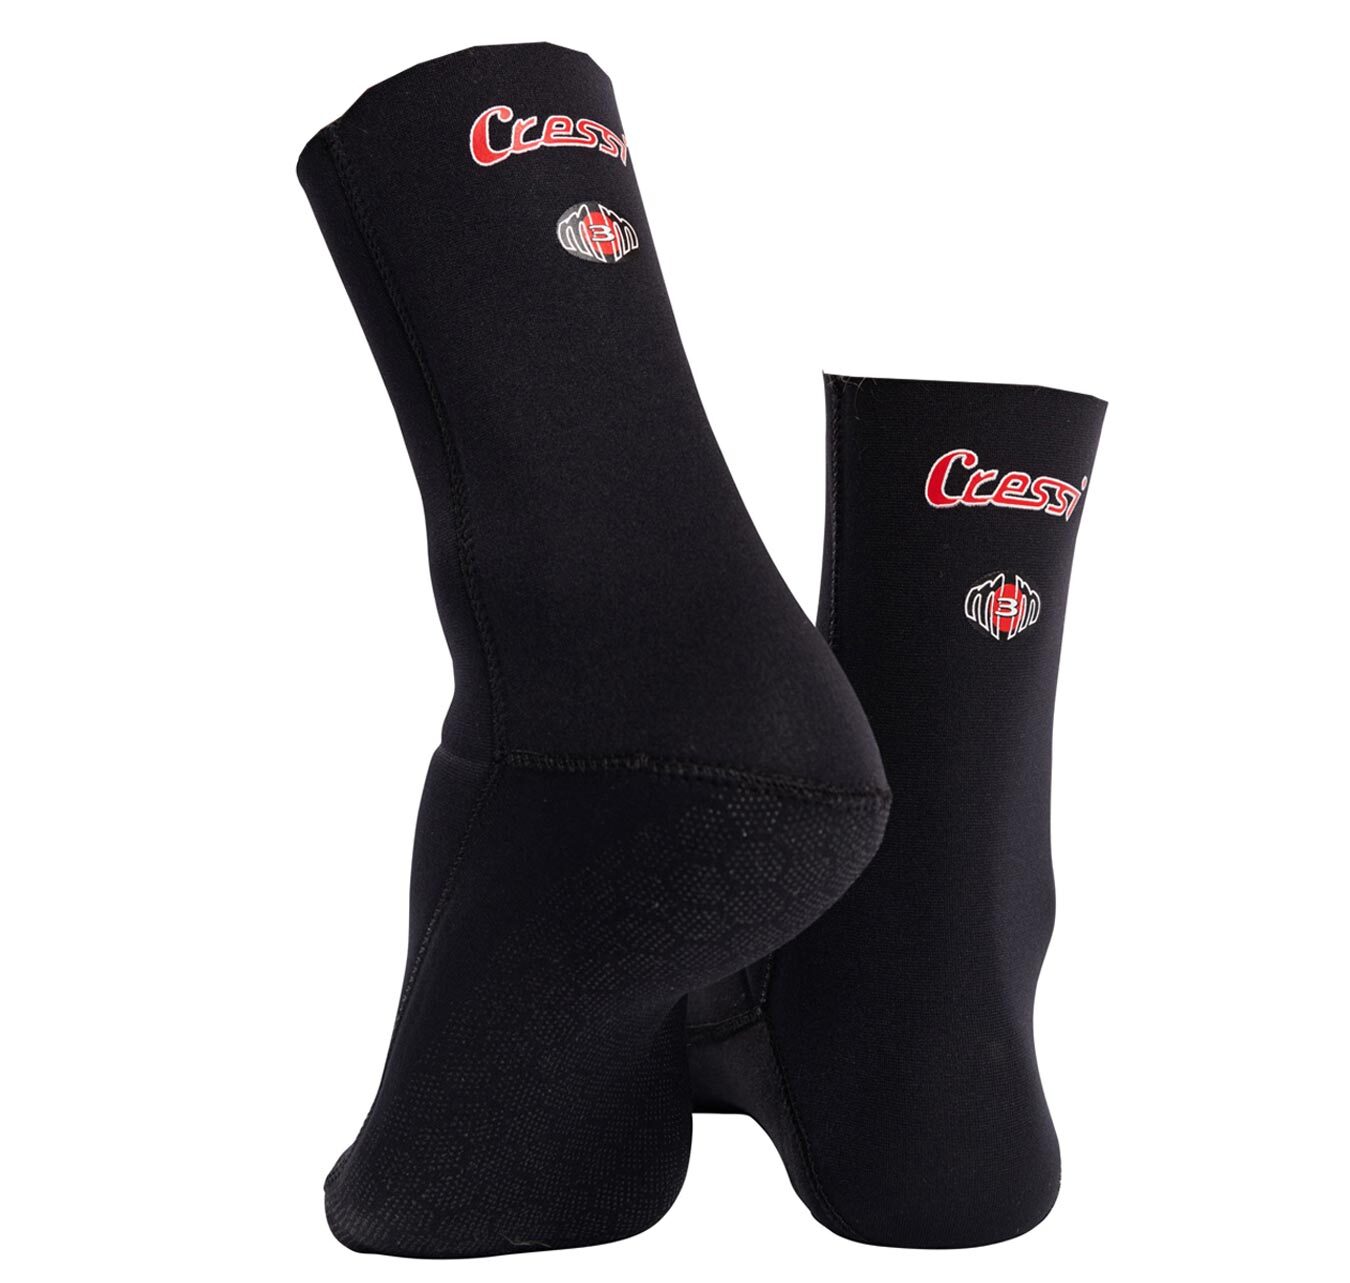 CRESSI SUPA 3MM SPEARFISHING AND DIVING SOCKS